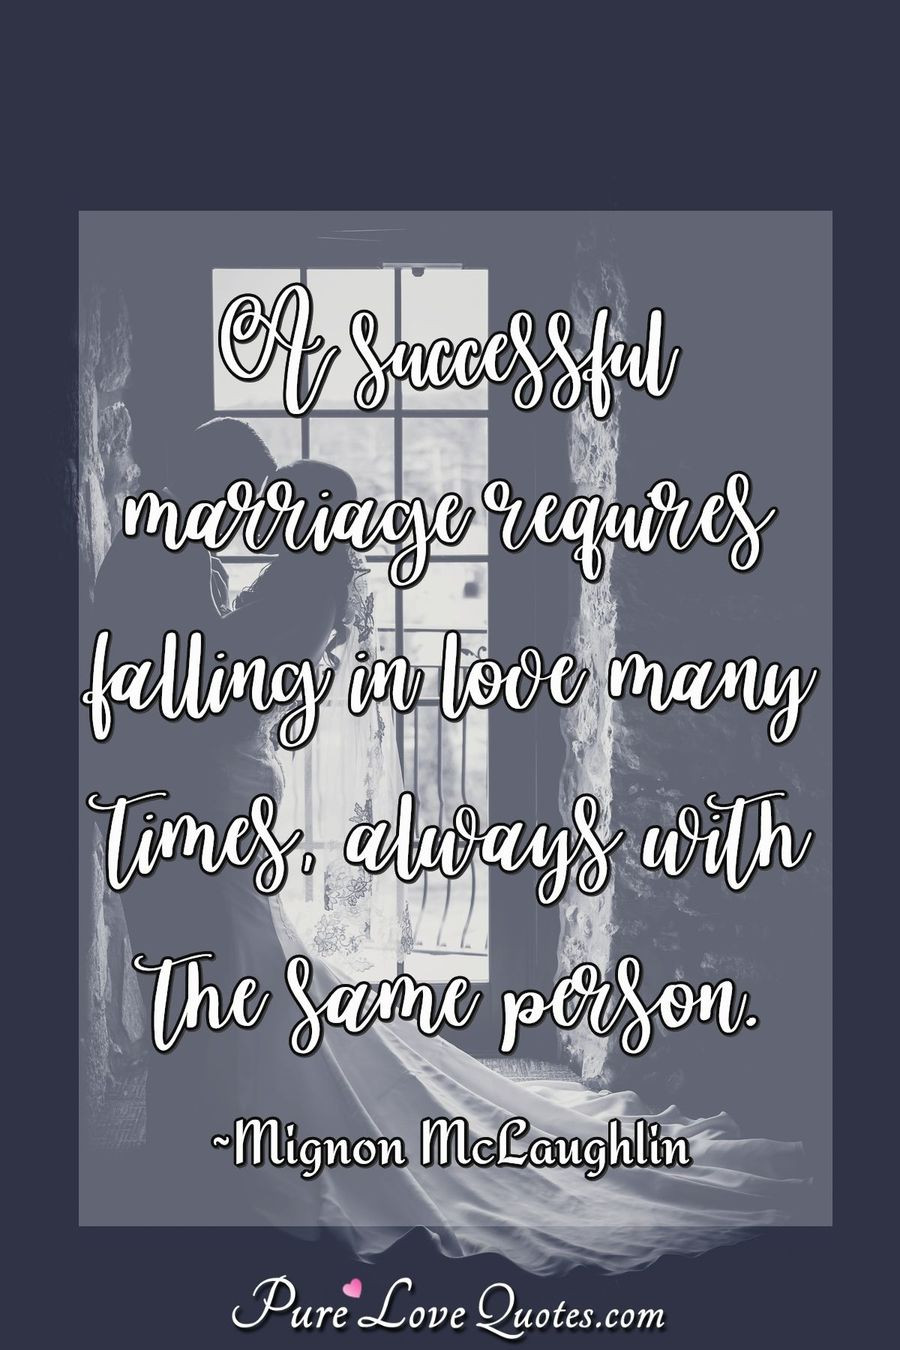 Successful Marriage Quote
 A successful marriage requires falling in love many times